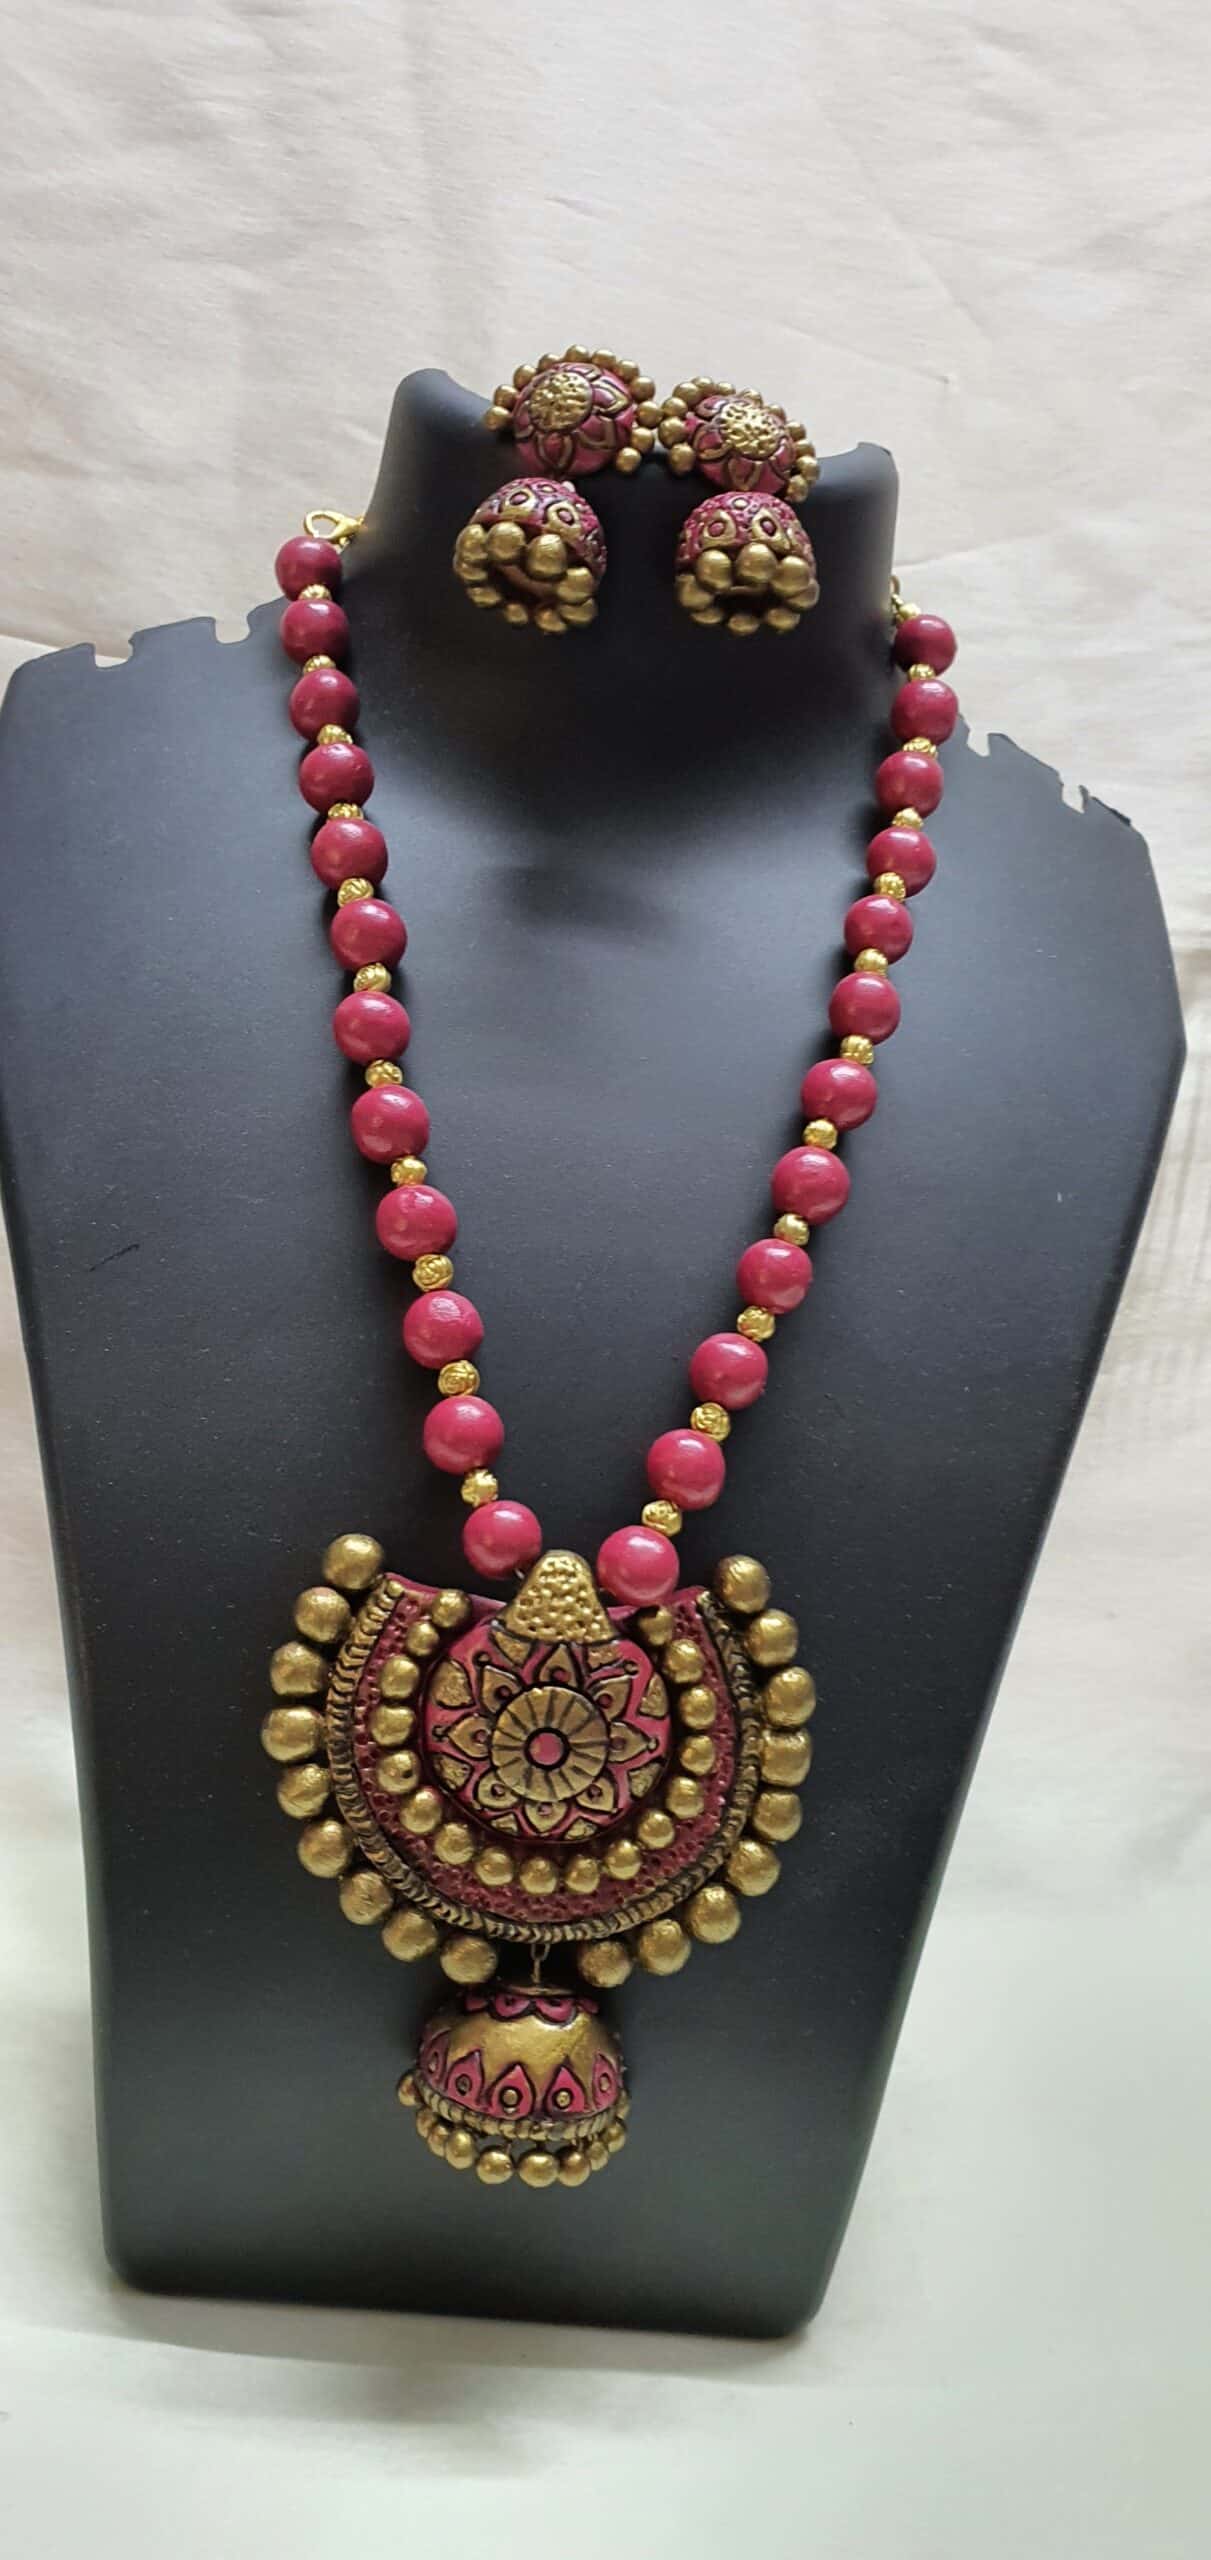 Mannu: A Unique Place For Handmade Terracotta Jewellery - PinkLungi